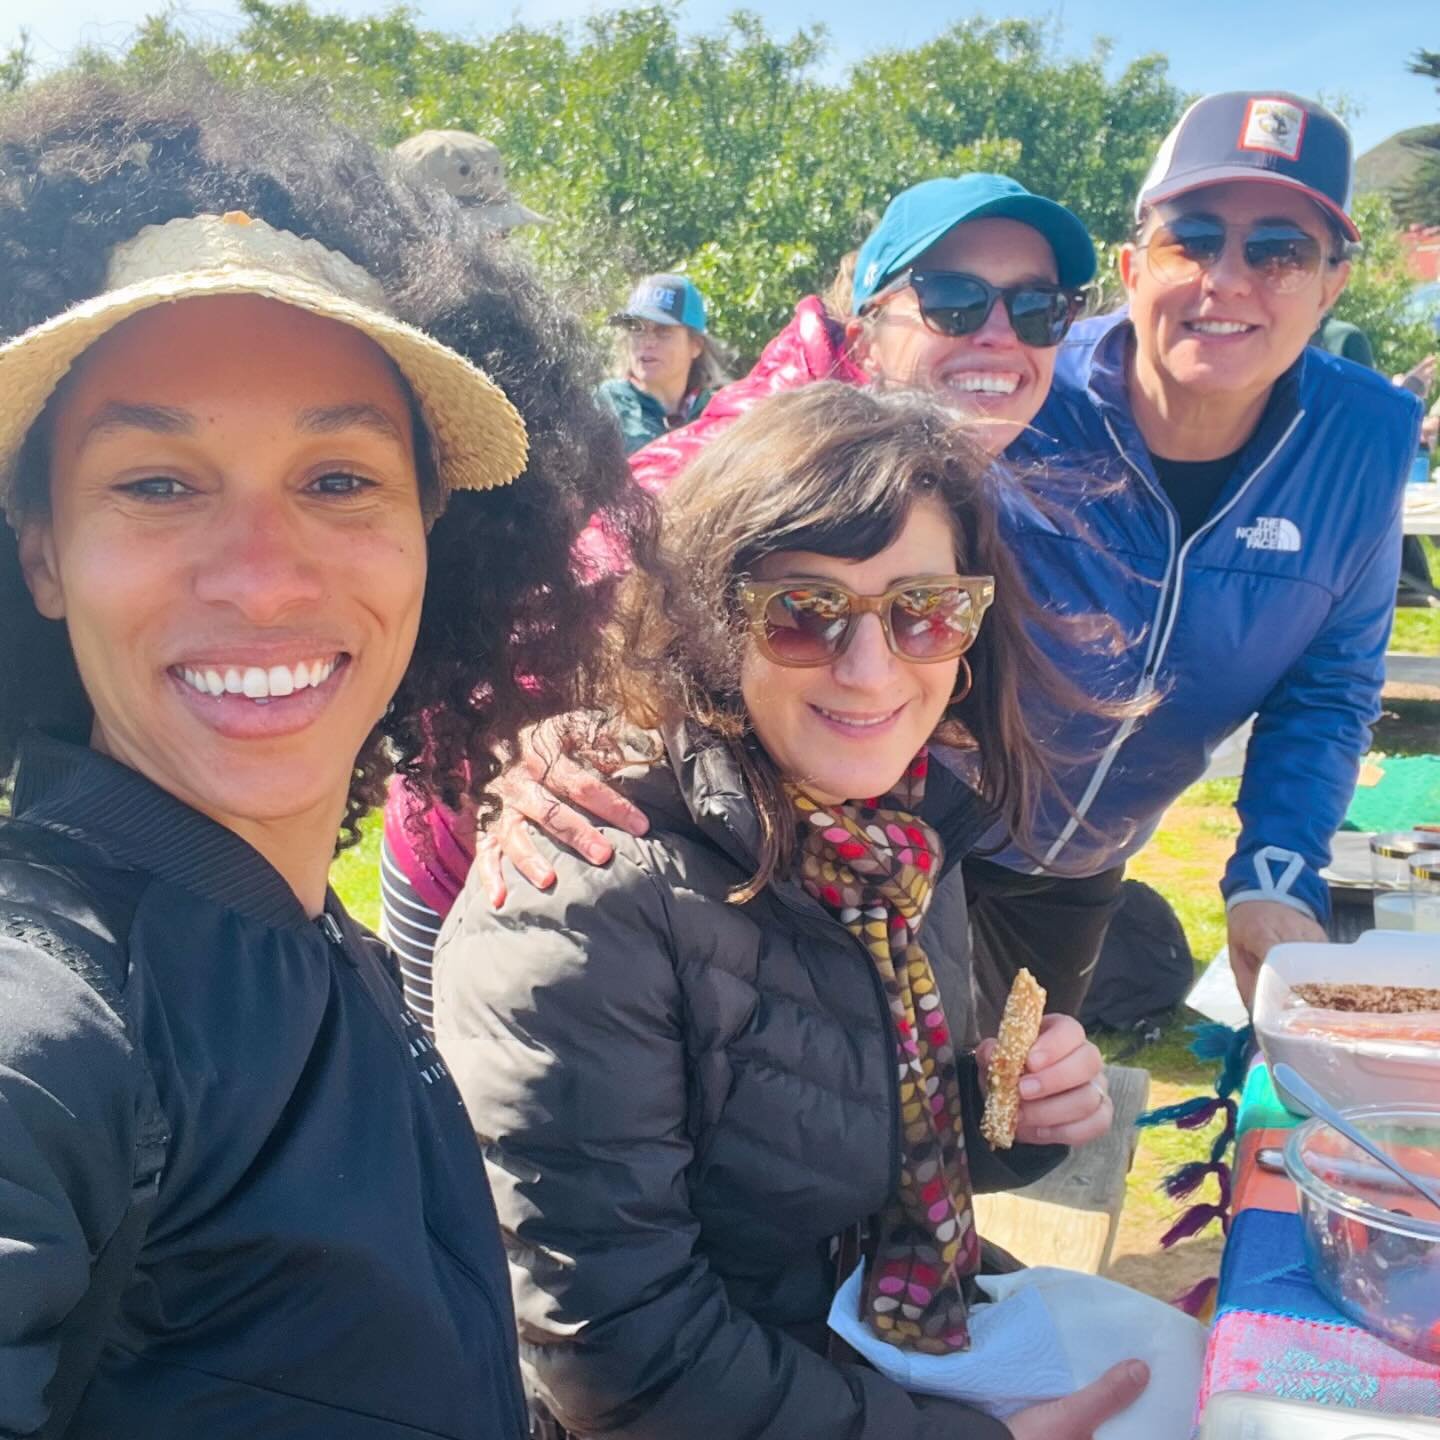 This spring, move more by hiking and immersing yourself in the vibrant cultural events blossoming in @castateparks! Join captivating musical performances, engaging community festivals, and inspiring Poetry in Parks events. Let&rsquo;s foster creativi